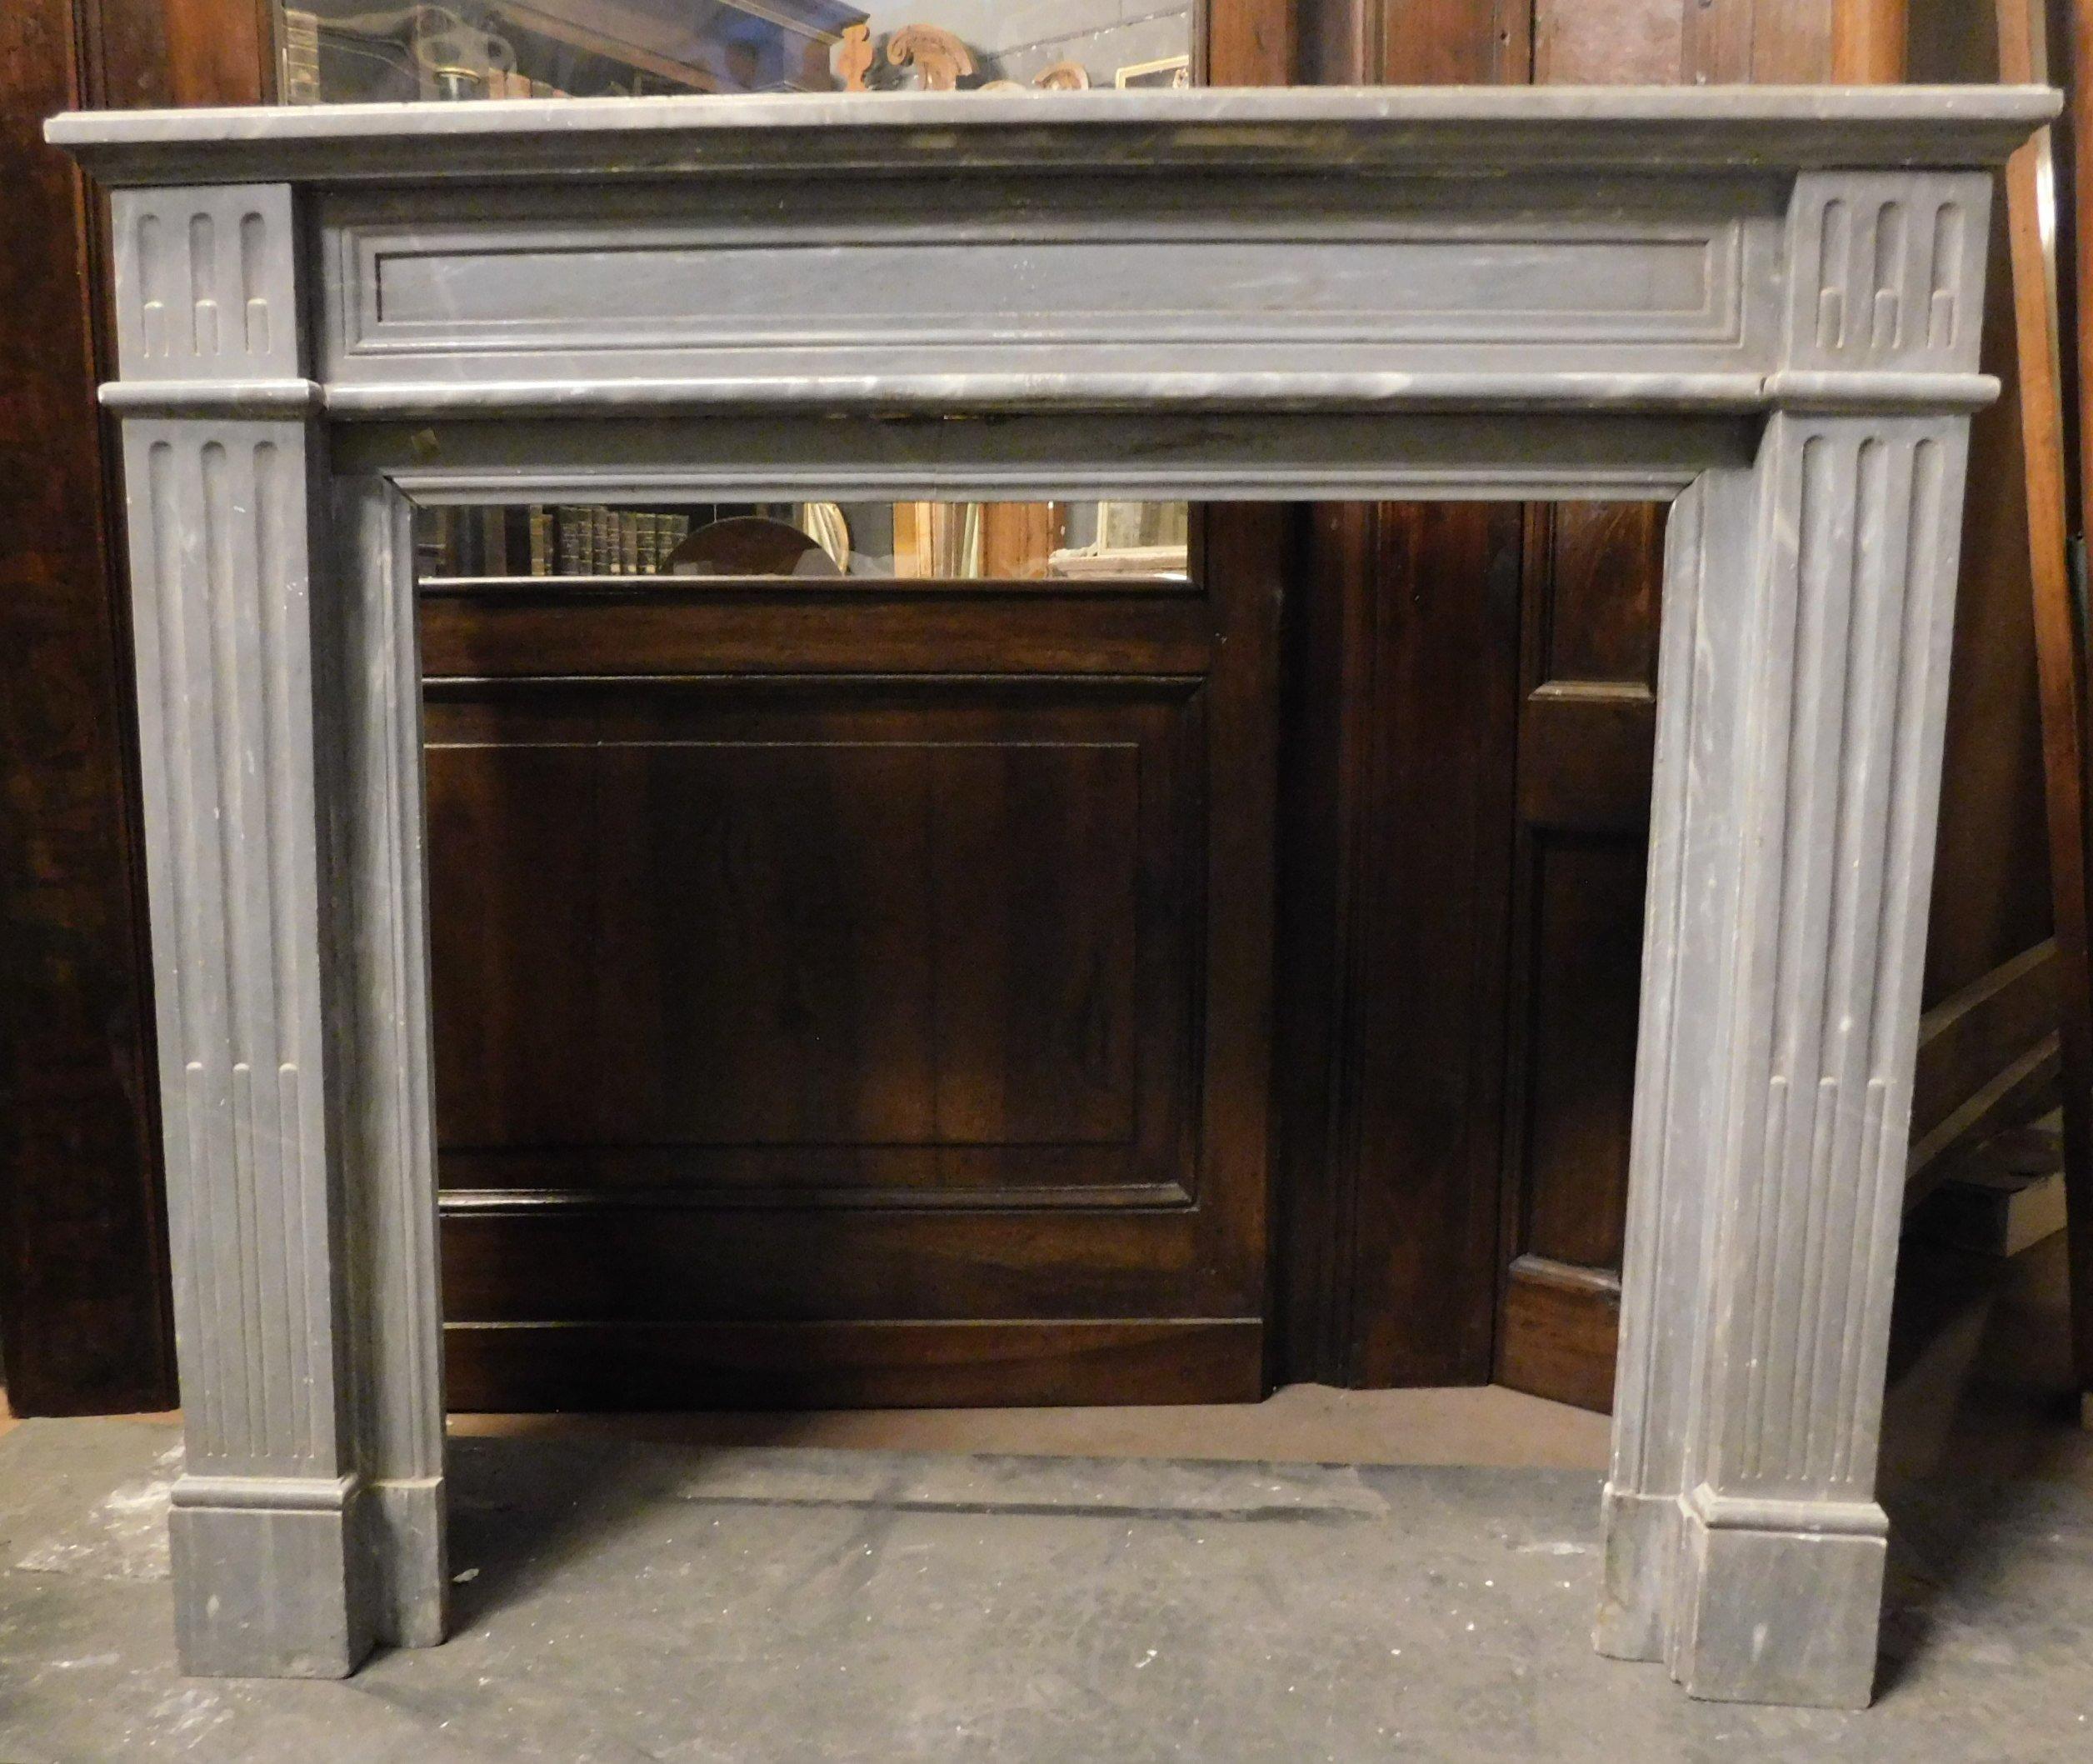 Antique fireplace in gray Bardiglio Imperiale marble, sculpted simple and geometric but with period columns, hand-built in the 18th century, in Italy.
Simple and also usable in modern contexts thanks to its geometry and clean lines.
maximum